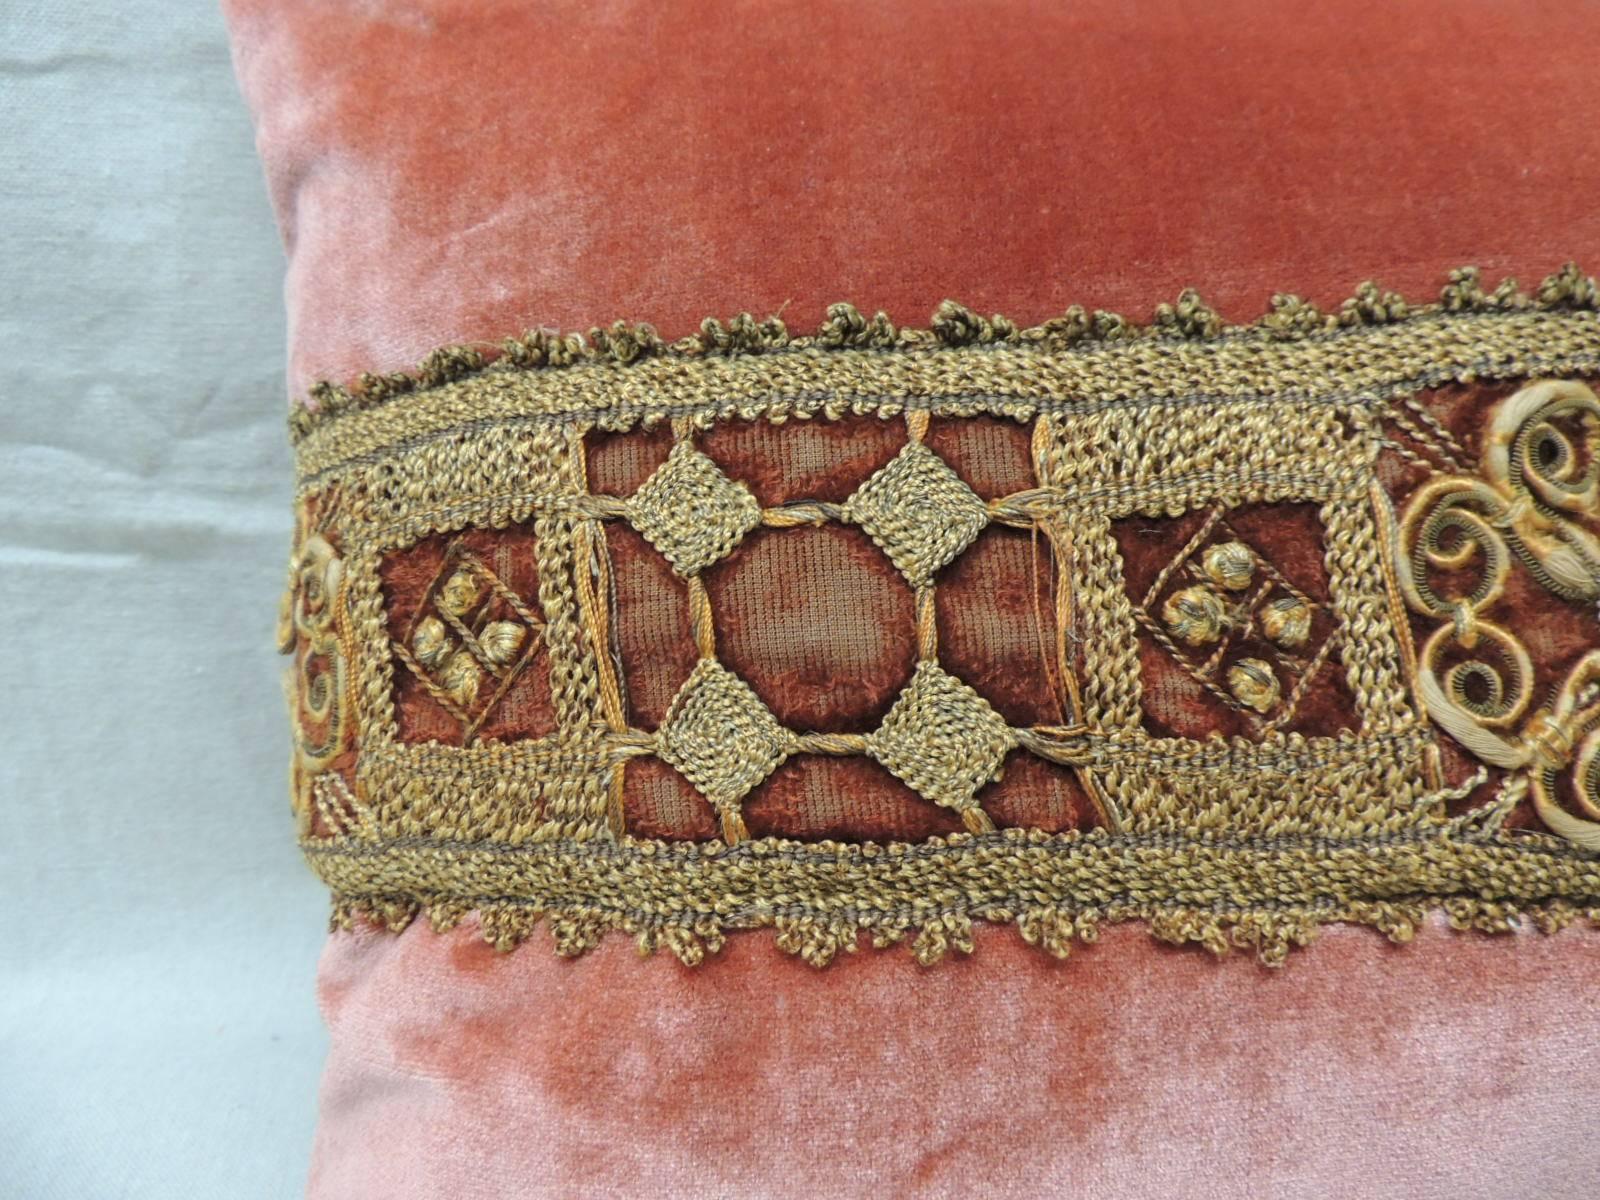 Large 18th century antique embroidered trim, metallic threads on velvet backing burnt orange silk crushed velvet, applique with small checked silk patter in yellow, orange and blue.